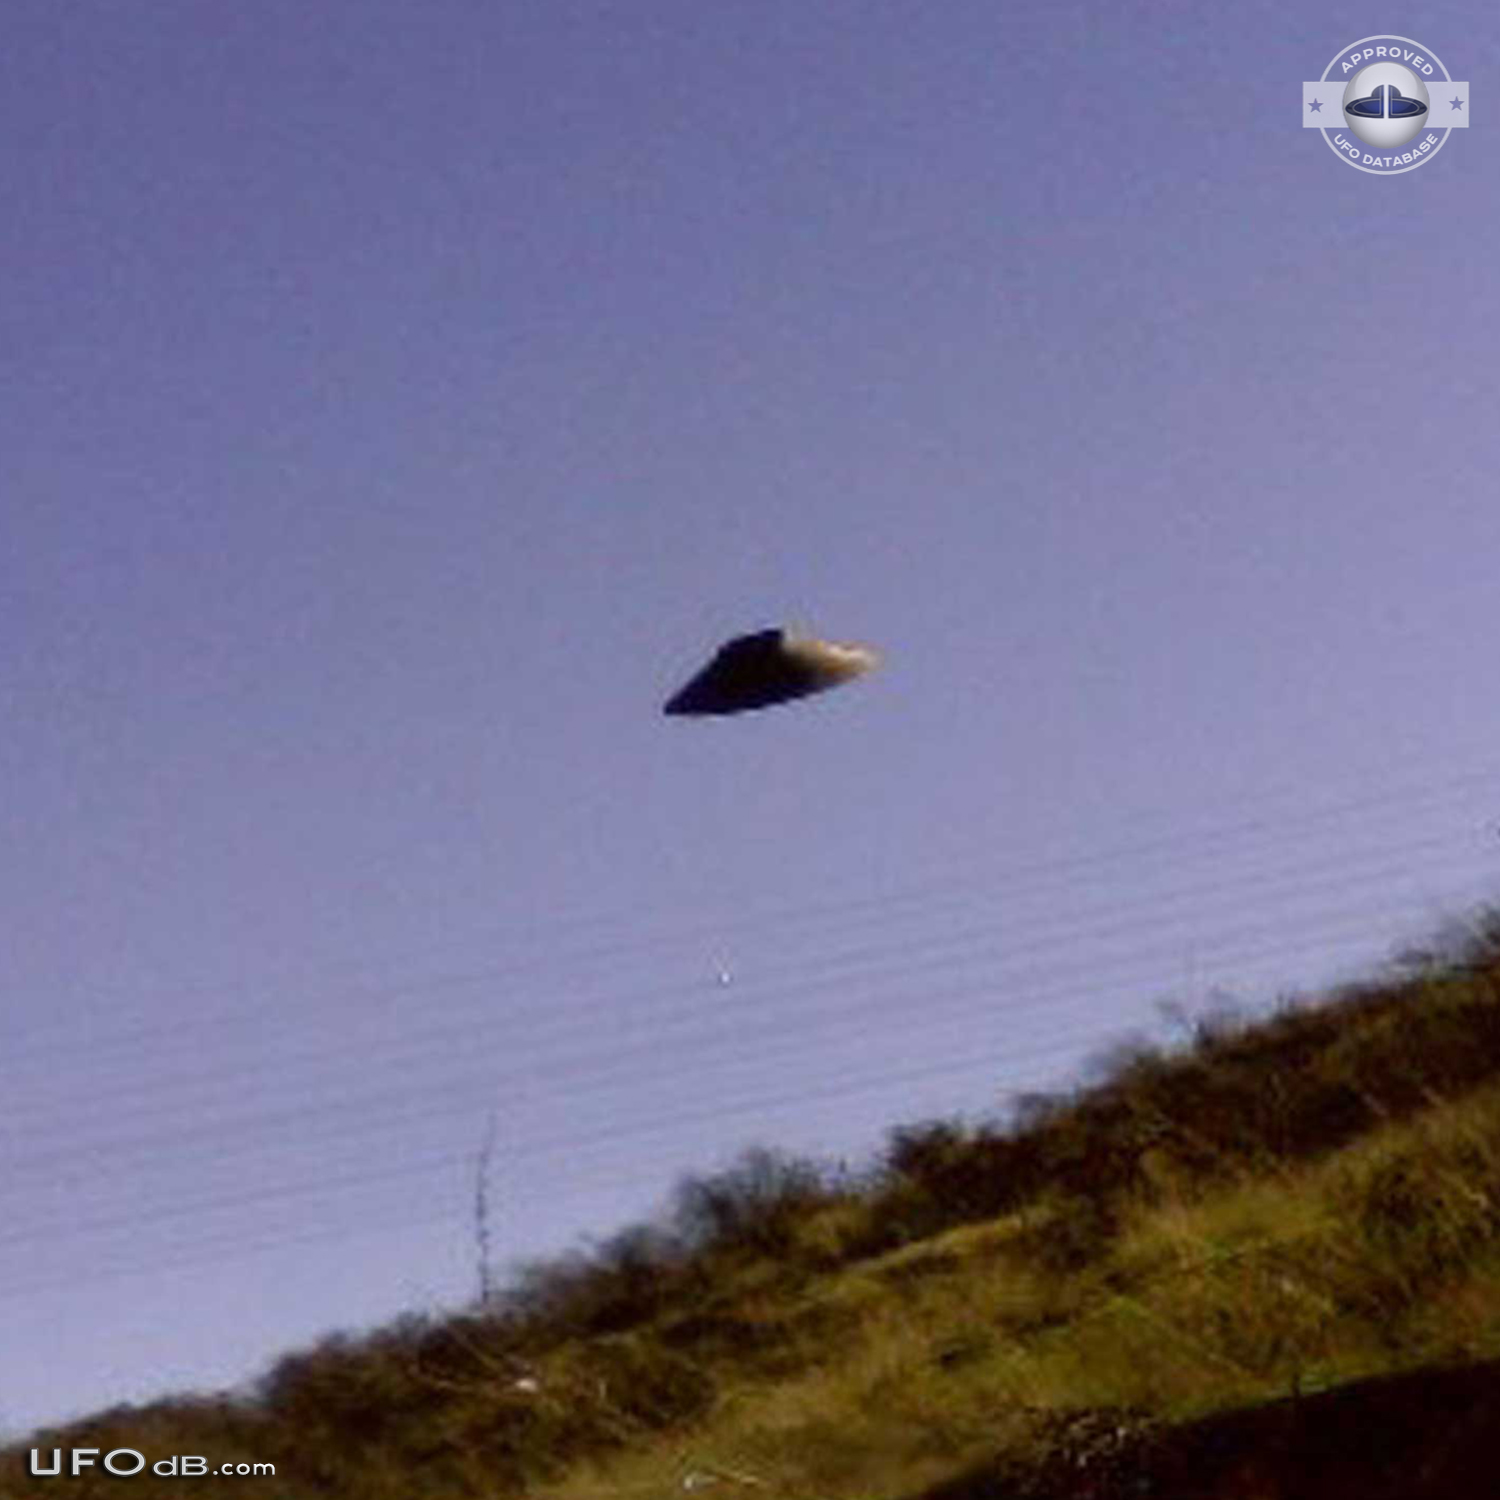 UFO Pictures 2009 UFO over San Diego County California United states. UFO Picture #429-2